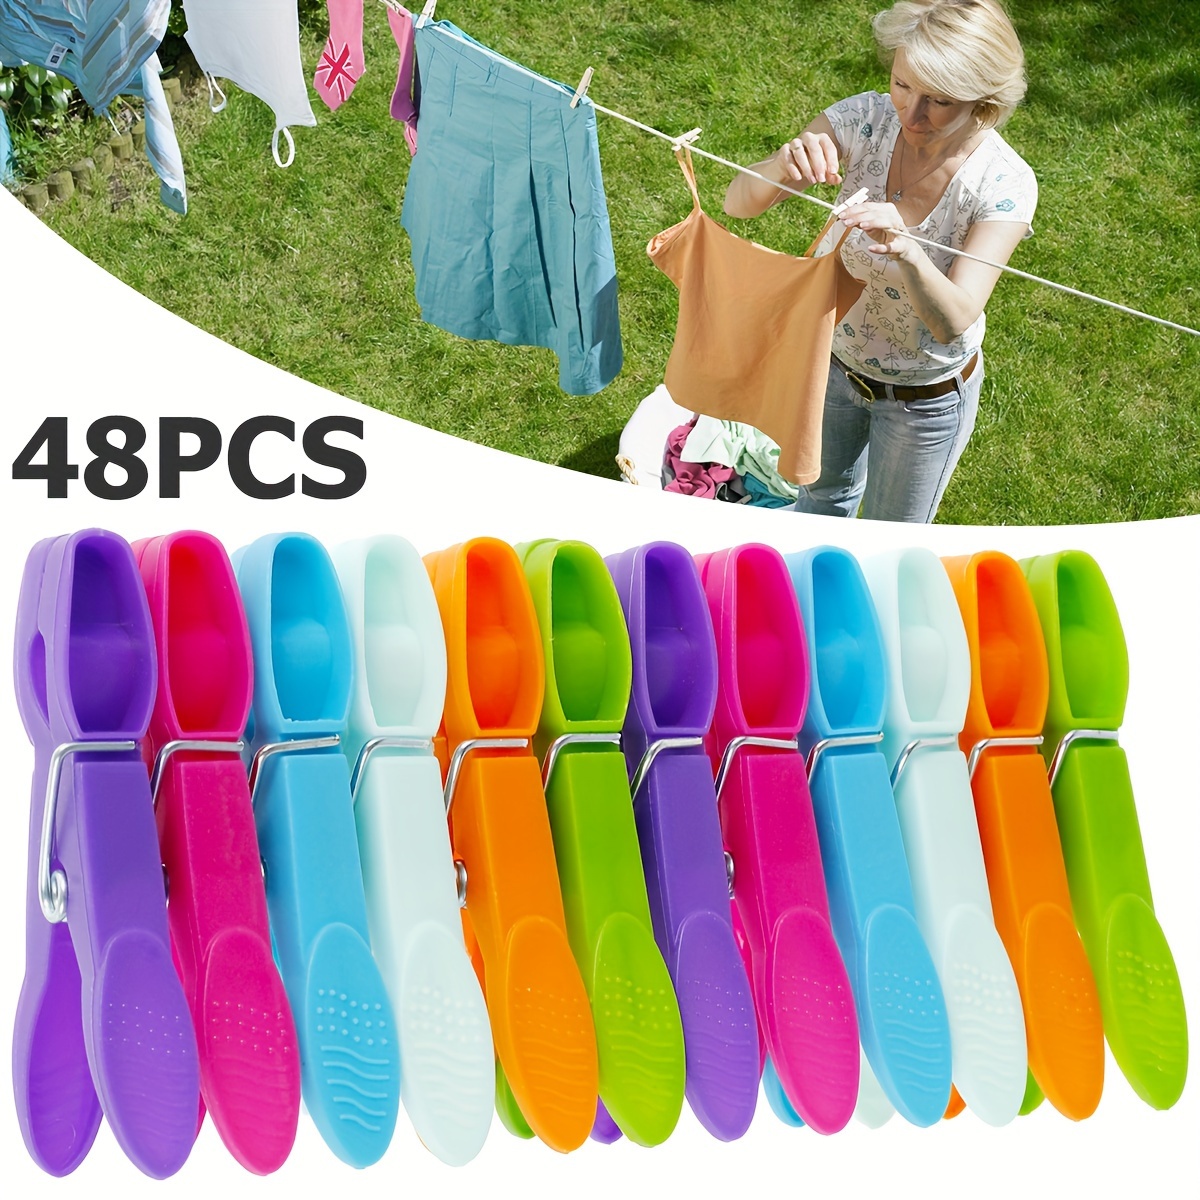 

48pcs Color Clothes Pegs For Washing Line, Strong Grip Washing Pegs, Soft Plastic Clothes Drying Pin Clips, Home Laundry Pegs, Windproof Clothespin